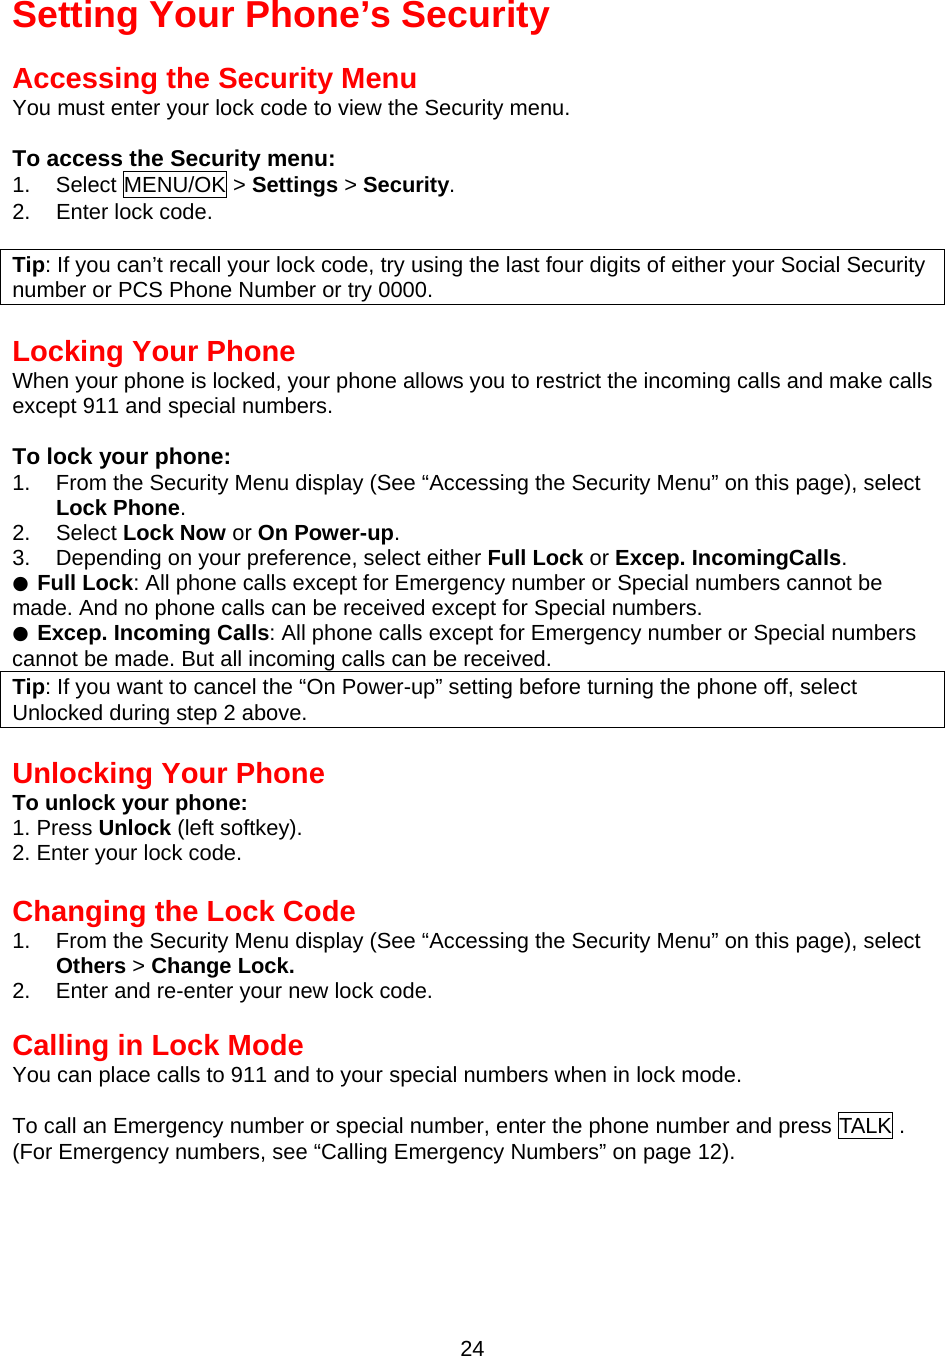 Setting Your Phone’s Security  Accessing the Security Menu You must enter your lock code to view the Security menu.  To access the Security menu: 1. Select MENU/OK &gt; Settings &gt; Security. 2. Enter lock code.  Tip: If you can’t recall your lock code, try using the last four digits of either your Social Security number or PCS Phone Number or try 0000.  Locking Your Phone When your phone is locked, your phone allows you to restrict the incoming calls and make calls except 911 and special numbers.  To lock your phone: 1.  From the Security Menu display (See “Accessing the Security Menu” on this page), select Lock Phone. 2. Select Lock Now or On Power-up. 3.  Depending on your preference, select either Full Lock or Excep. IncomingCalls. ● Full Lock: All phone calls except for Emergency number or Special numbers cannot be made. And no phone calls can be received except for Special numbers. ● Excep. Incoming Calls: All phone calls except for Emergency number or Special numbers cannot be made. But all incoming calls can be received. Tip: If you want to cancel the “On Power-up” setting before turning the phone off, select Unlocked during step 2 above.  Unlocking Your Phone To unlock your phone: 1. Press Unlock (left softkey). 2. Enter your lock code.  Changing the Lock Code 1.  From the Security Menu display (See “Accessing the Security Menu” on this page), select Others &gt; Change Lock.  2.  Enter and re-enter your new lock code.  Calling in Lock Mode You can place calls to 911 and to your special numbers when in lock mode.  To call an Emergency number or special number, enter the phone number and press TALK . (For Emergency numbers, see “Calling Emergency Numbers” on page 12).  24